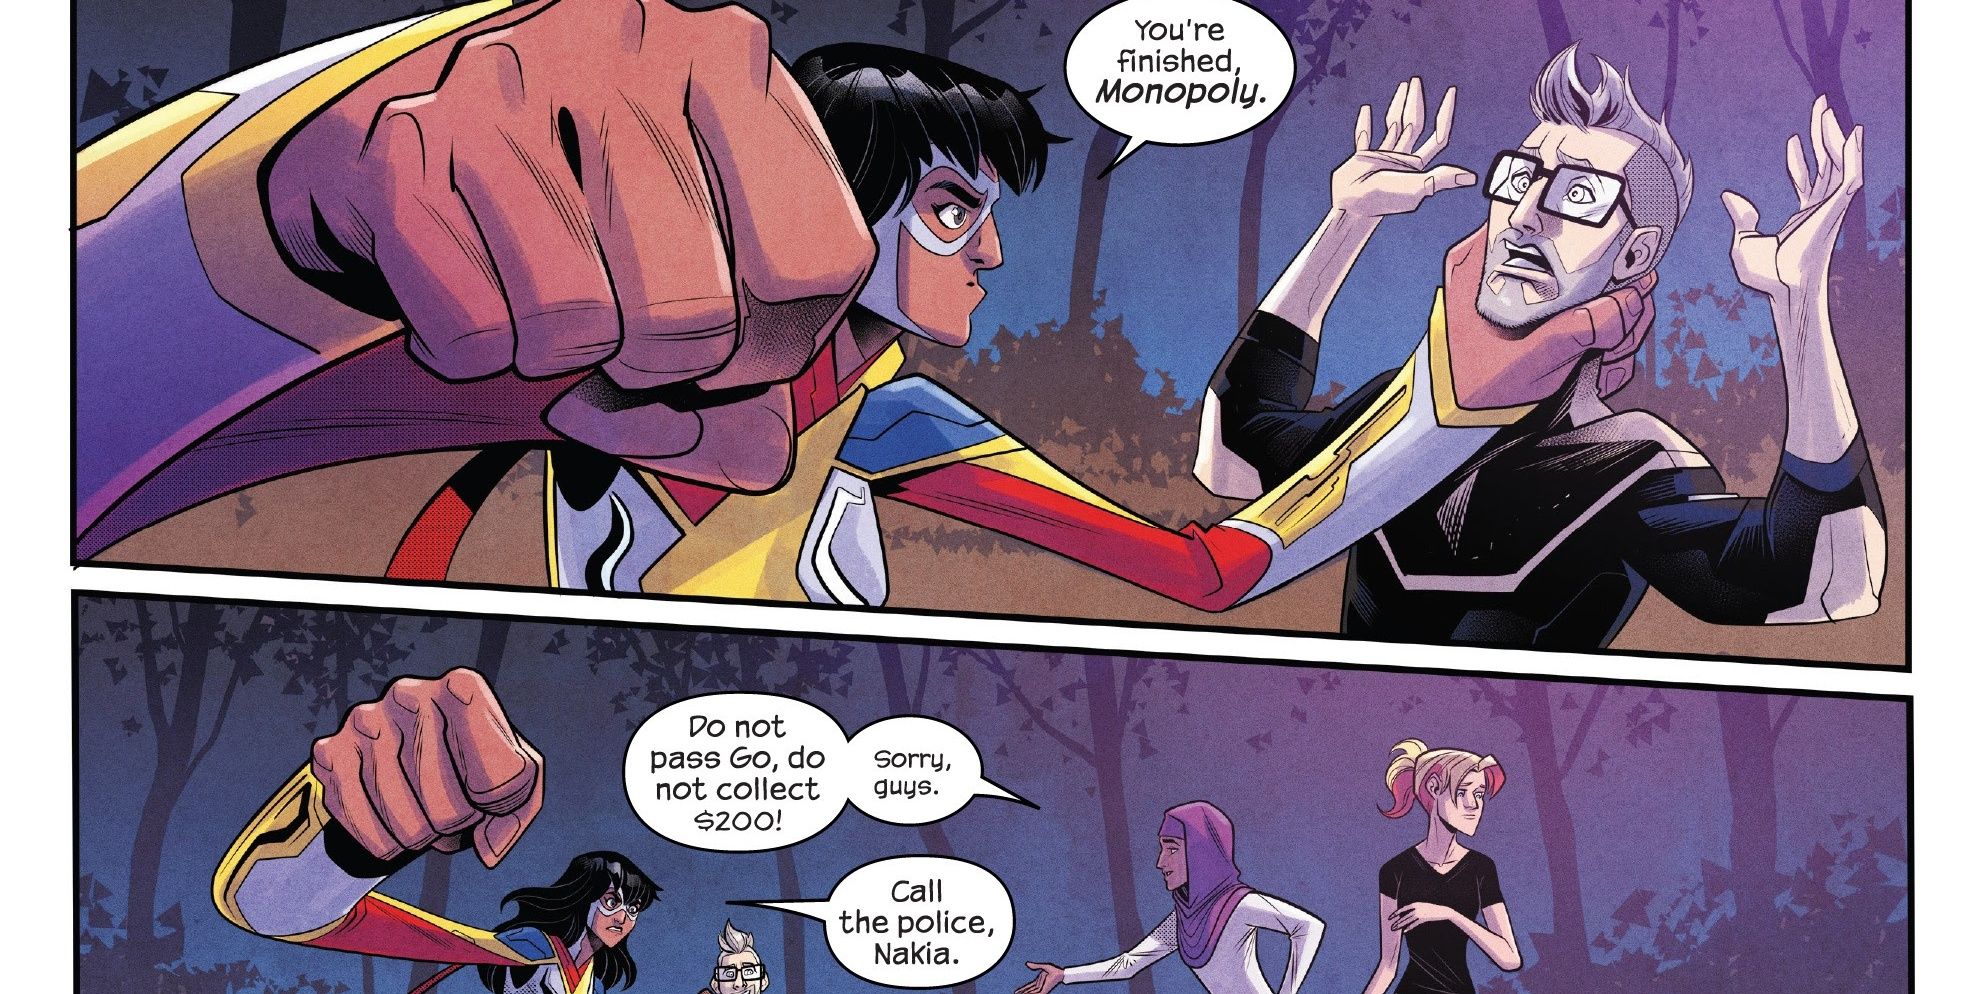 Ms. Marvel Takes Down Monopoly With Friends